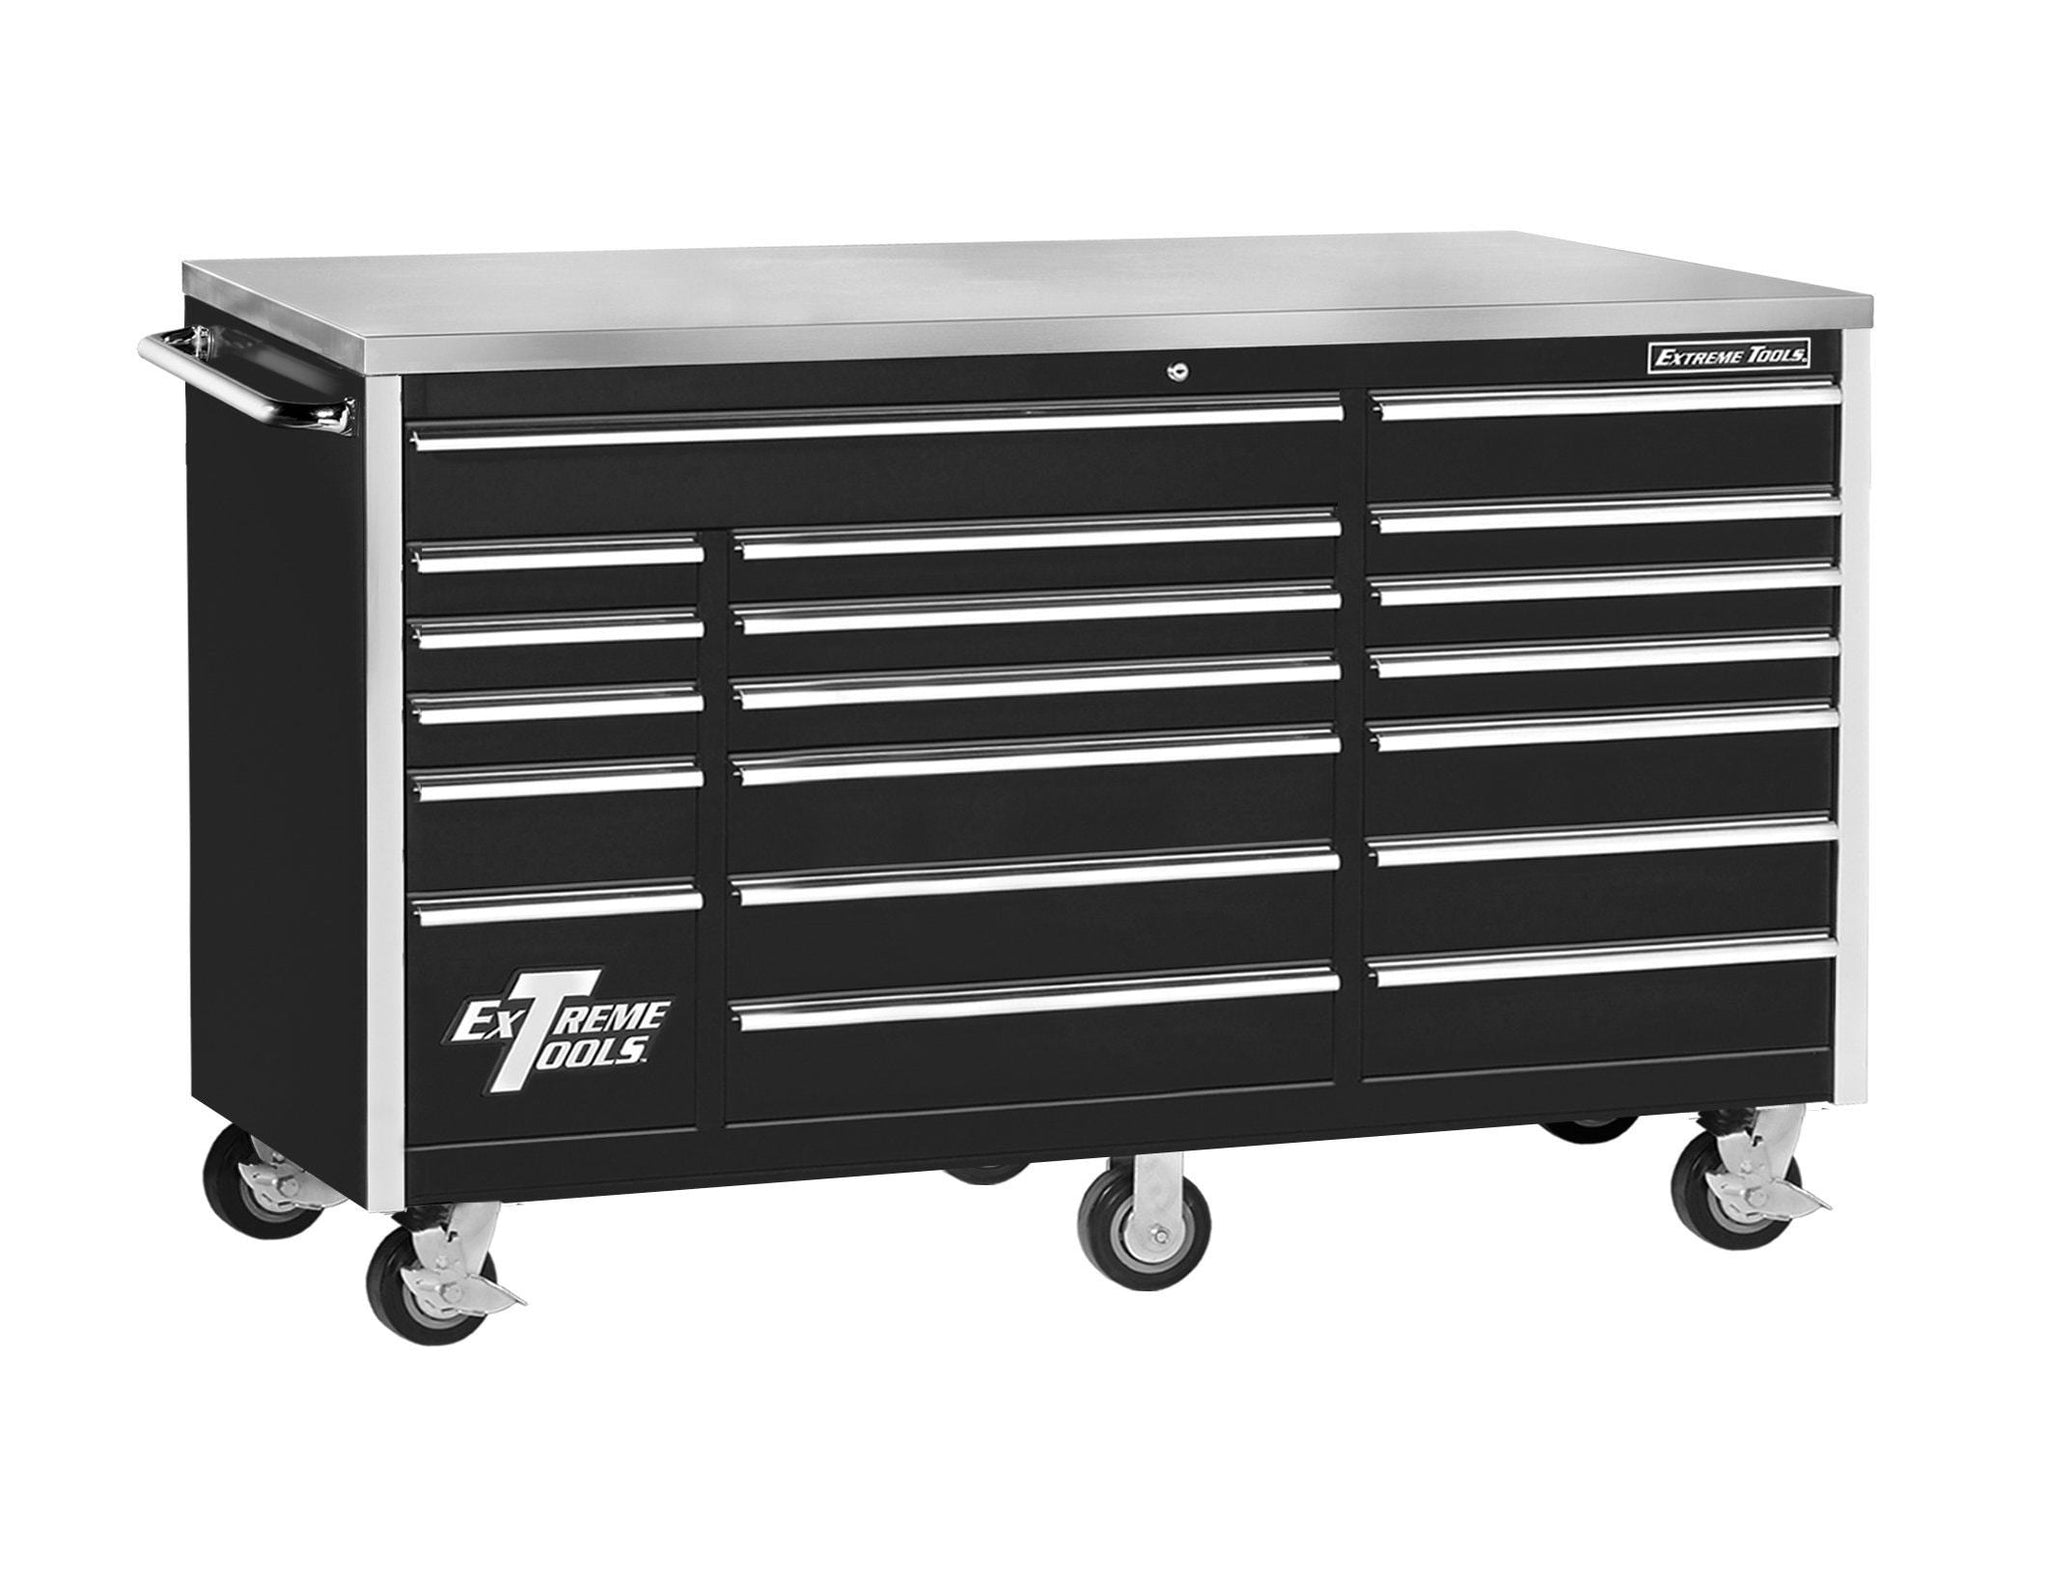 Organize with extreme tools ex7218rcbk 18 drawer triple bank roller cabinet in ball bearing slides 72 inch black high gloss powder coat finish